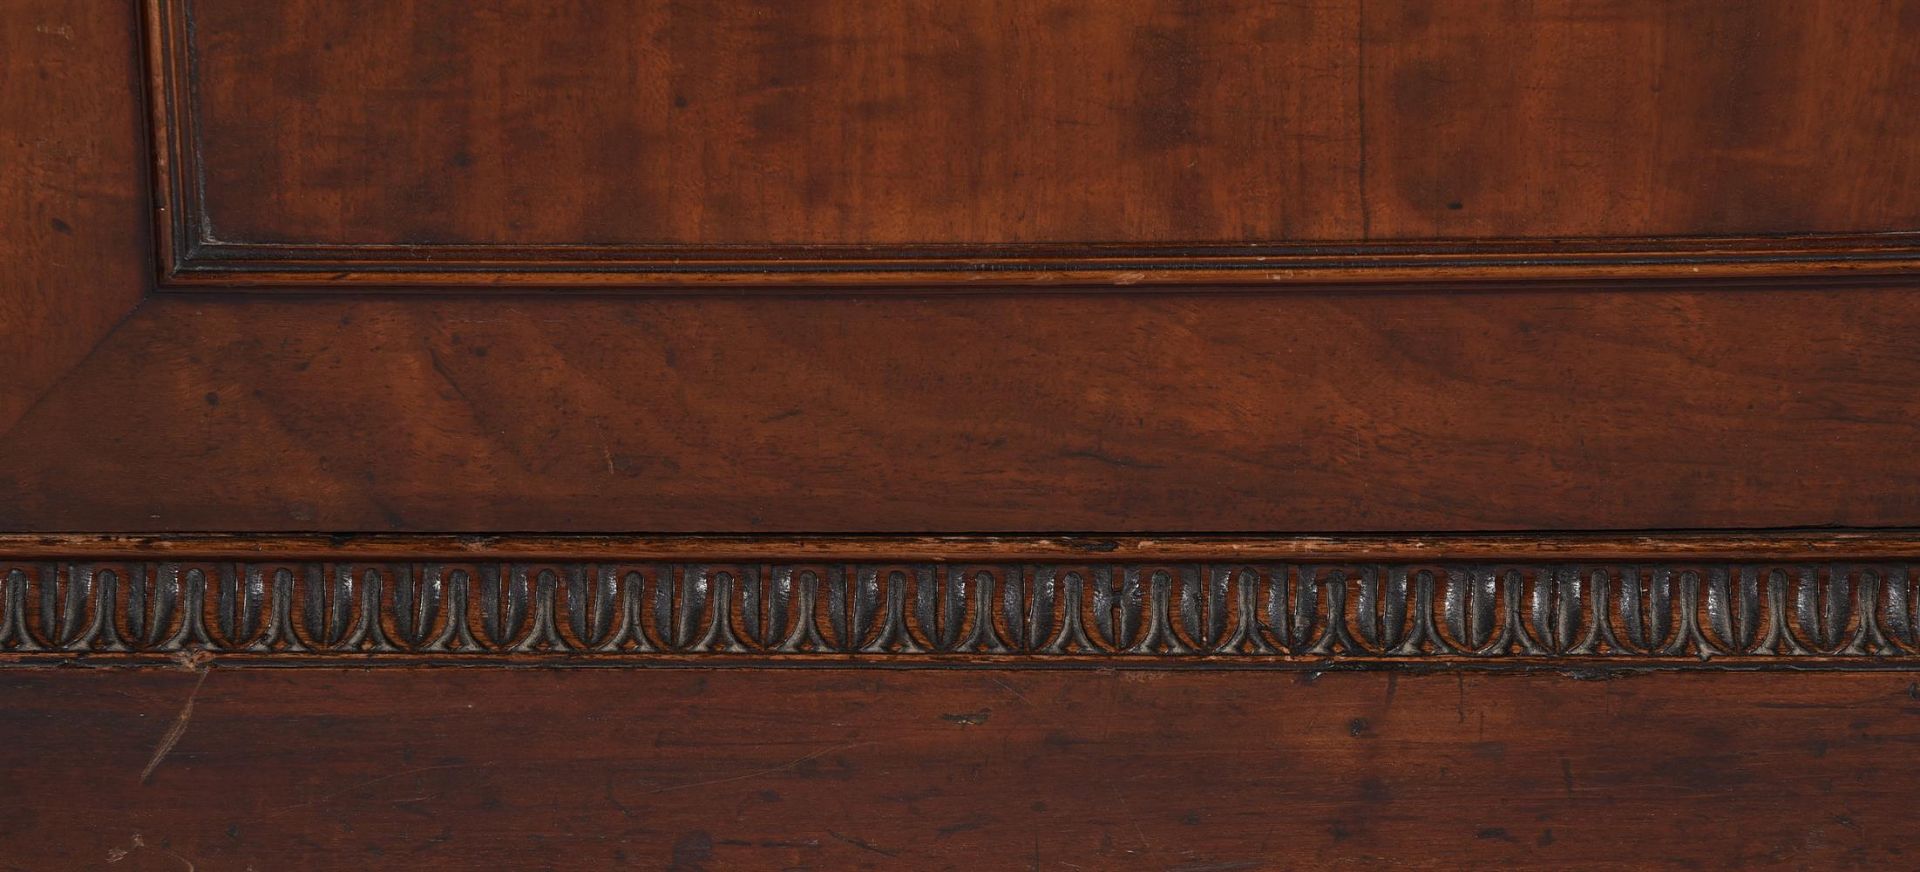 A PAIR OF GEORGE III MAHOGANY AND PARCEL GILT PEDESTAL CUPBOARDS, LATE 18TH CENTURY - Bild 5 aus 7